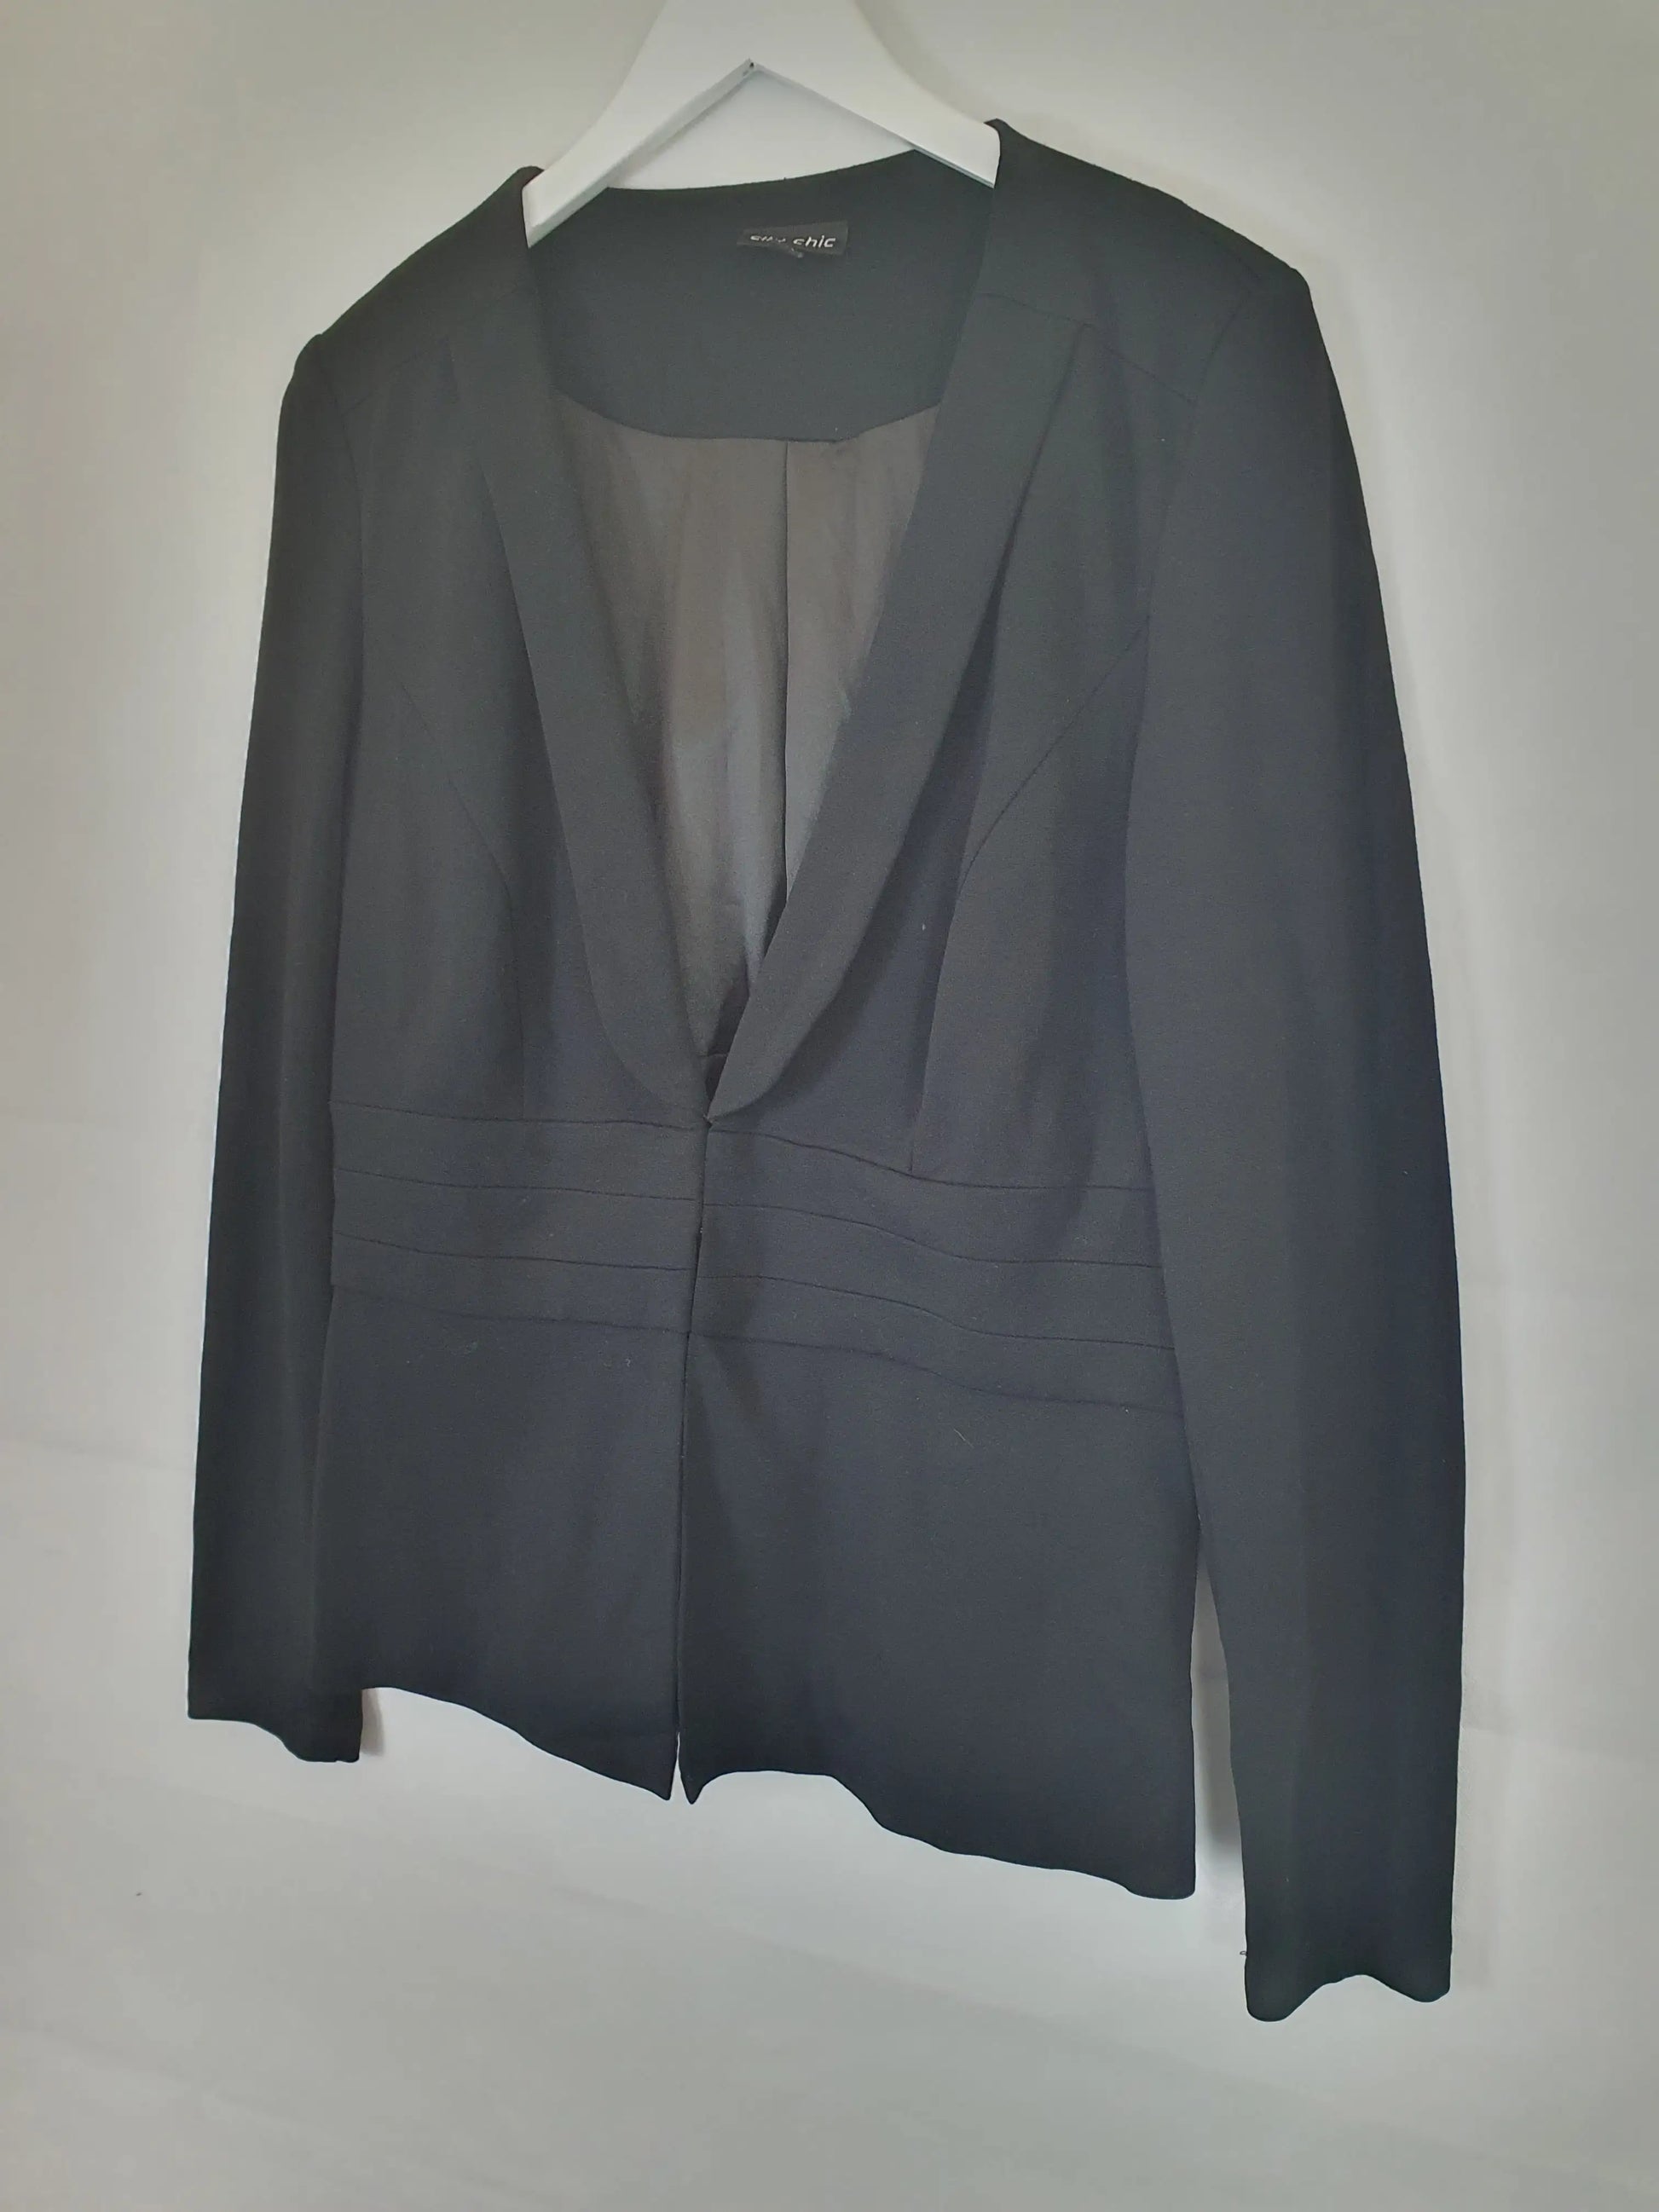 City Chic Buttonless Semi Formal Blazer Size XS Plus by SwapUp-Second Hand Shop-Thrift Store-Op Shop 